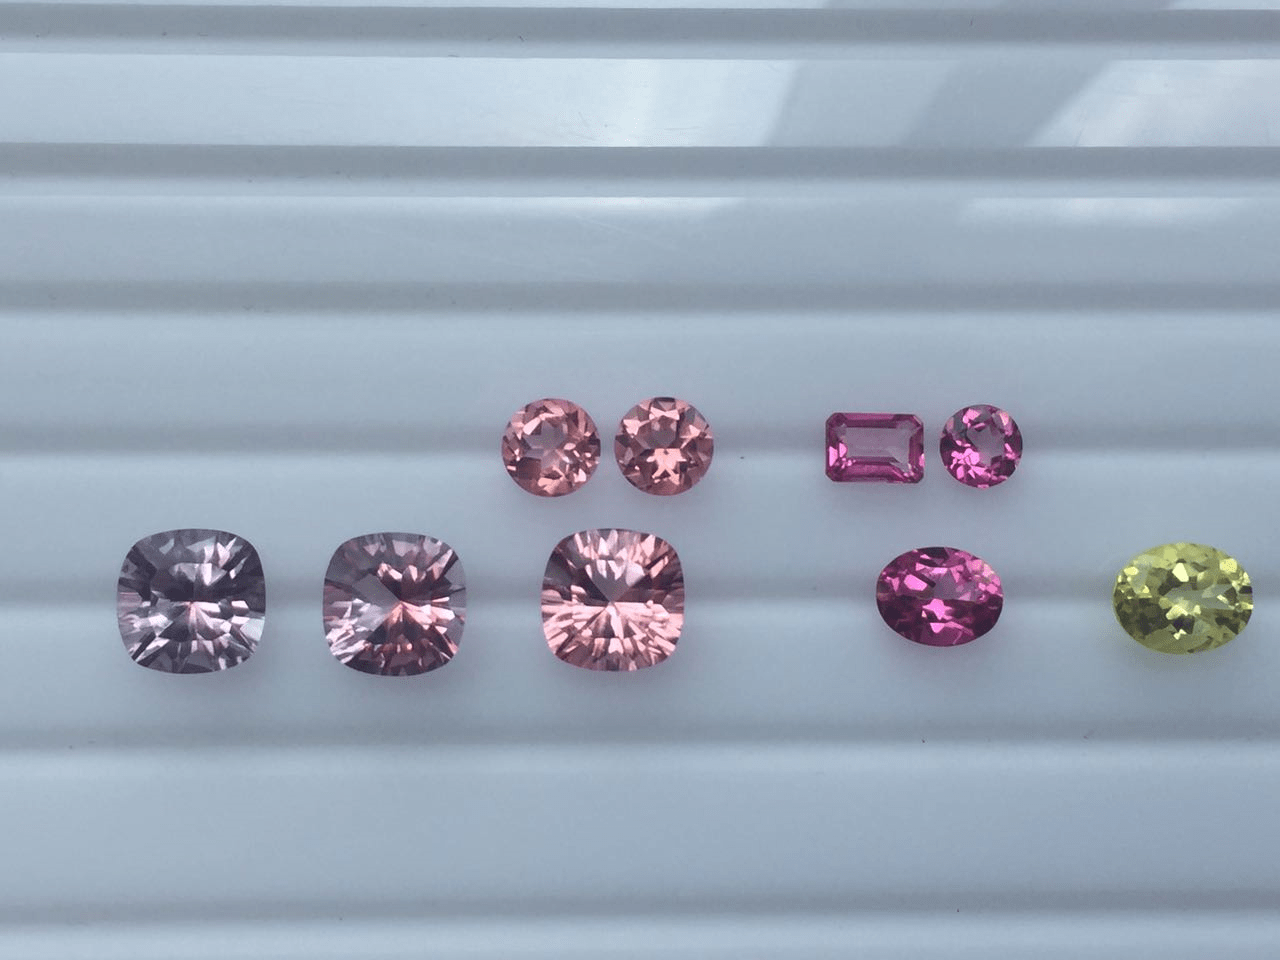 Topaz Gemstones Colors and Cuts